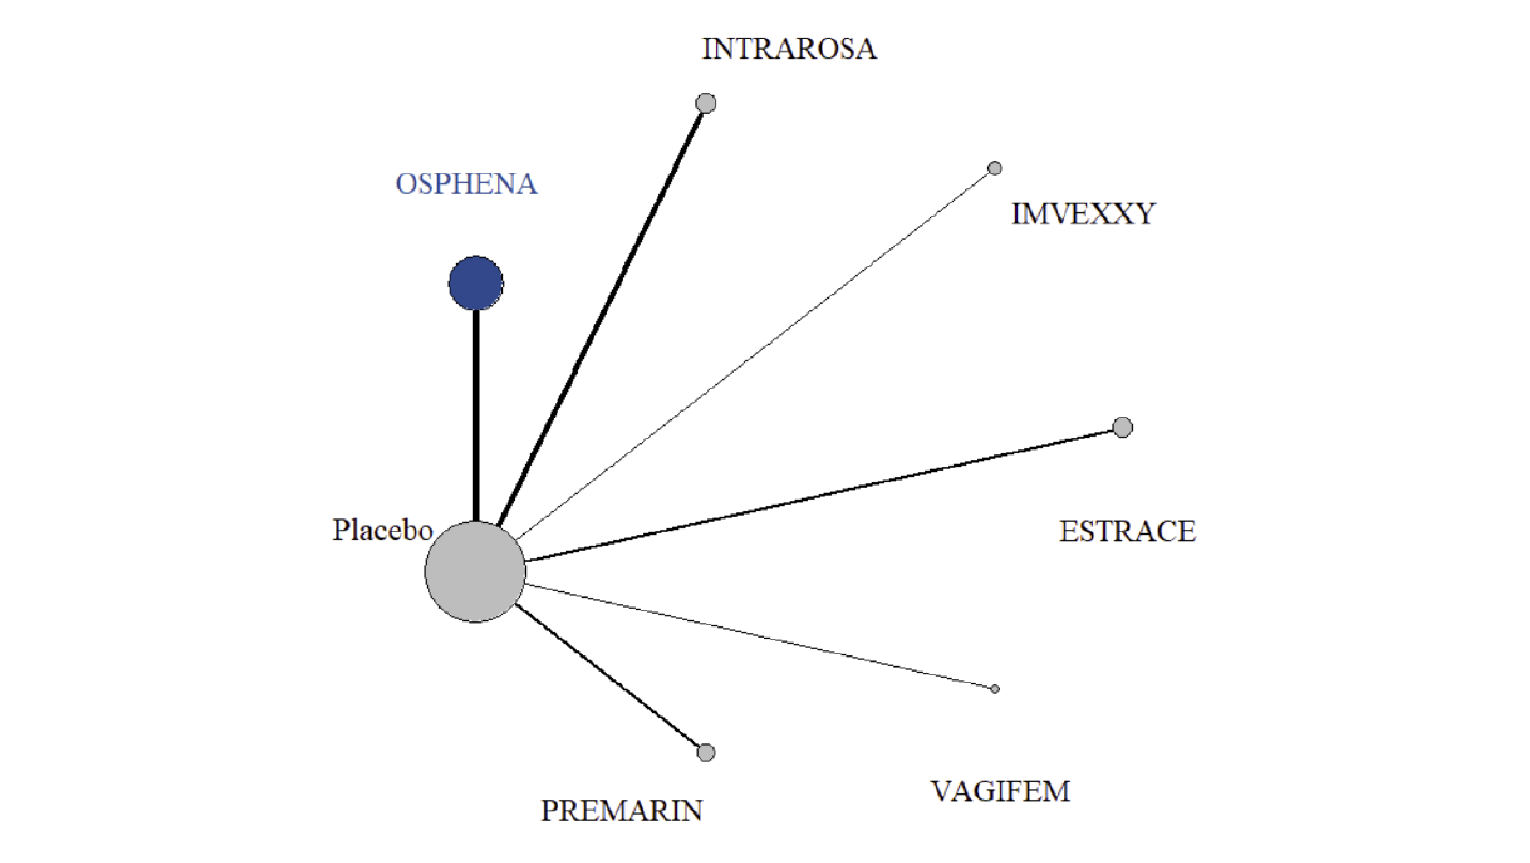 The evidence network for the reduction in the percentage of parabasal cells at 12 weeks is shown for the sponsor-submitted indirect treatment comparison. In the network, Osphena, Intrarosa, Imvexxy, Estrace, Vagifem, and Premarin are connected to each other indirectly through the placebo node.